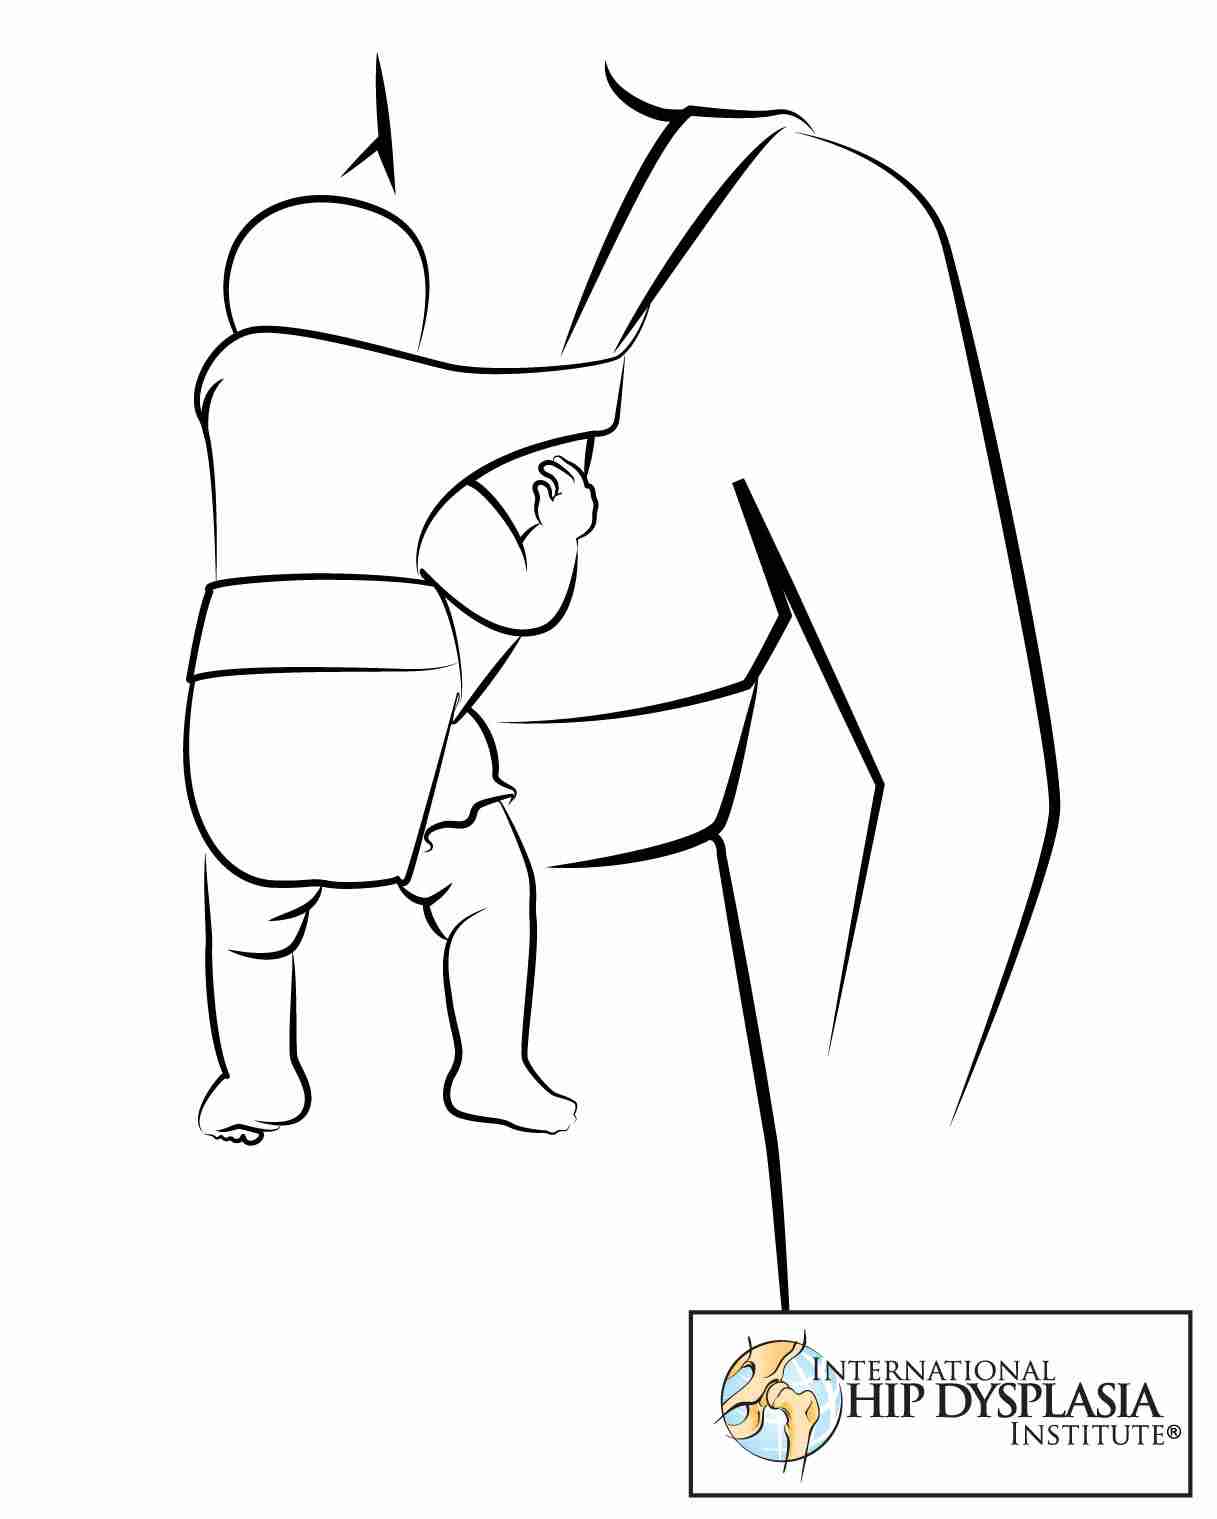 Dangling legs in baby carriers may contribute to hip dysplasia.